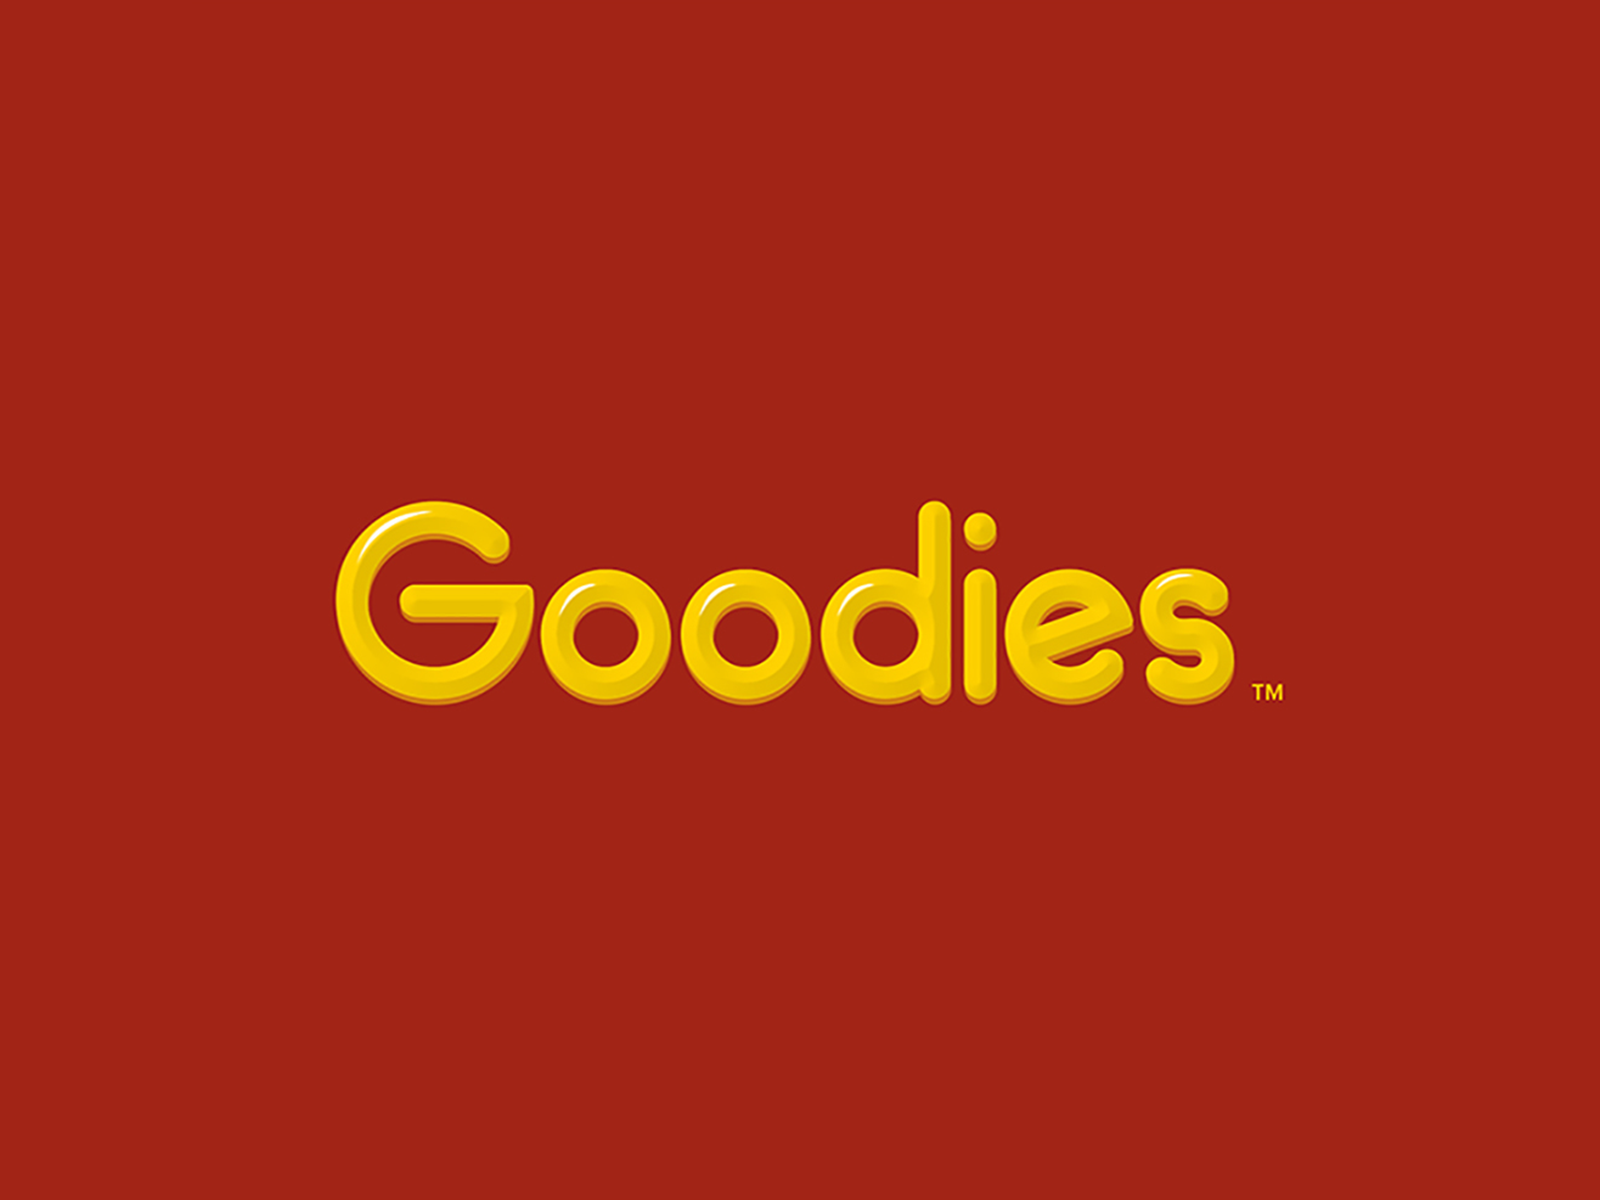 LOGO DESIGN FOR GOODIES by Myfxmedia on Dribbble